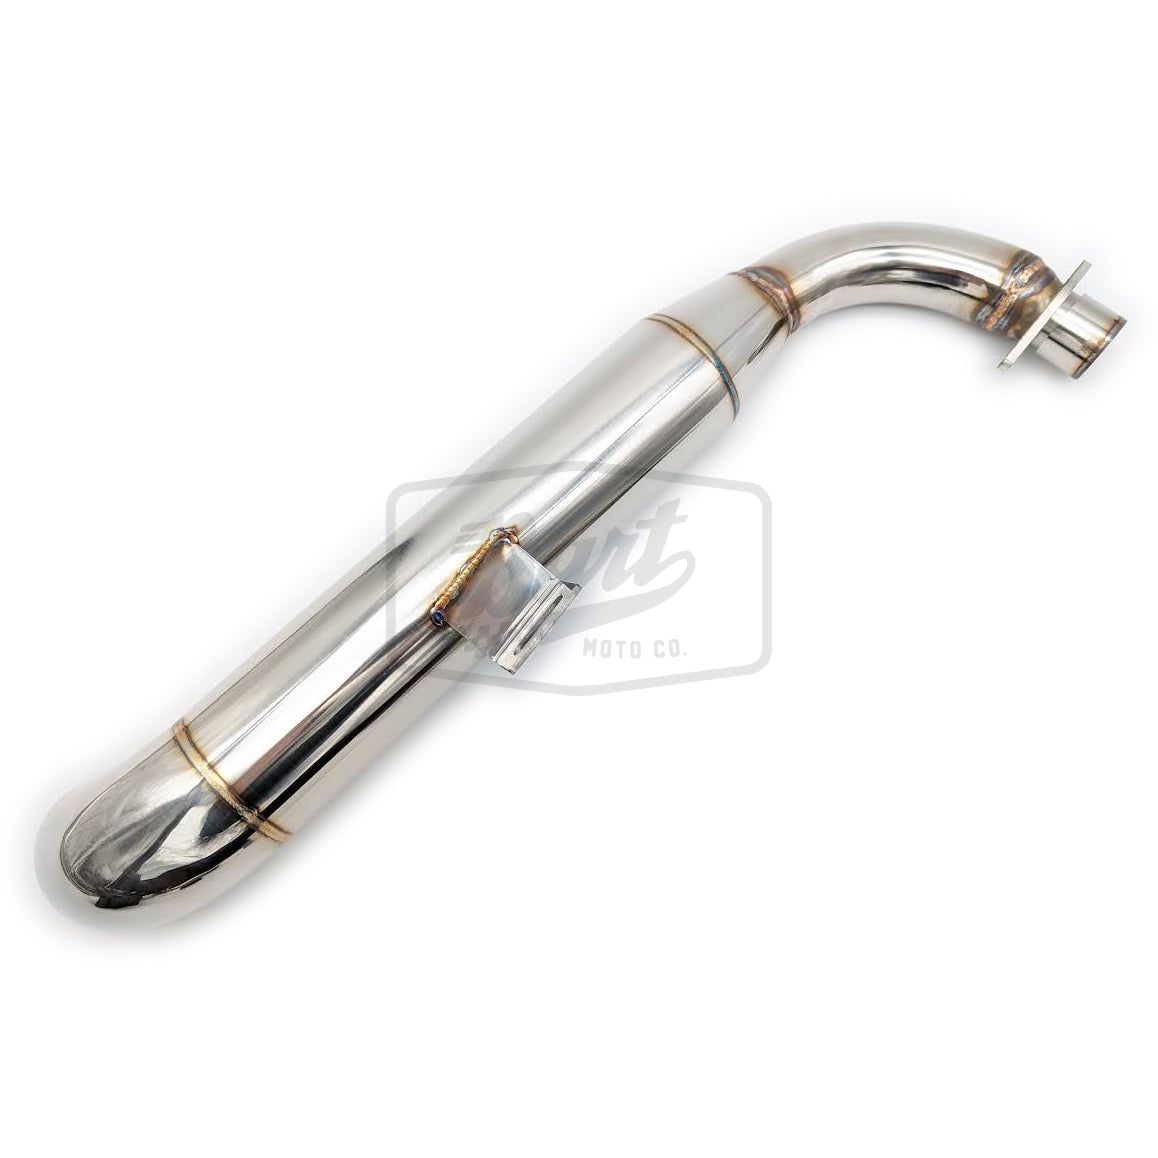 Z50 CT70 Drag Short Pipe Expansion Exhaust